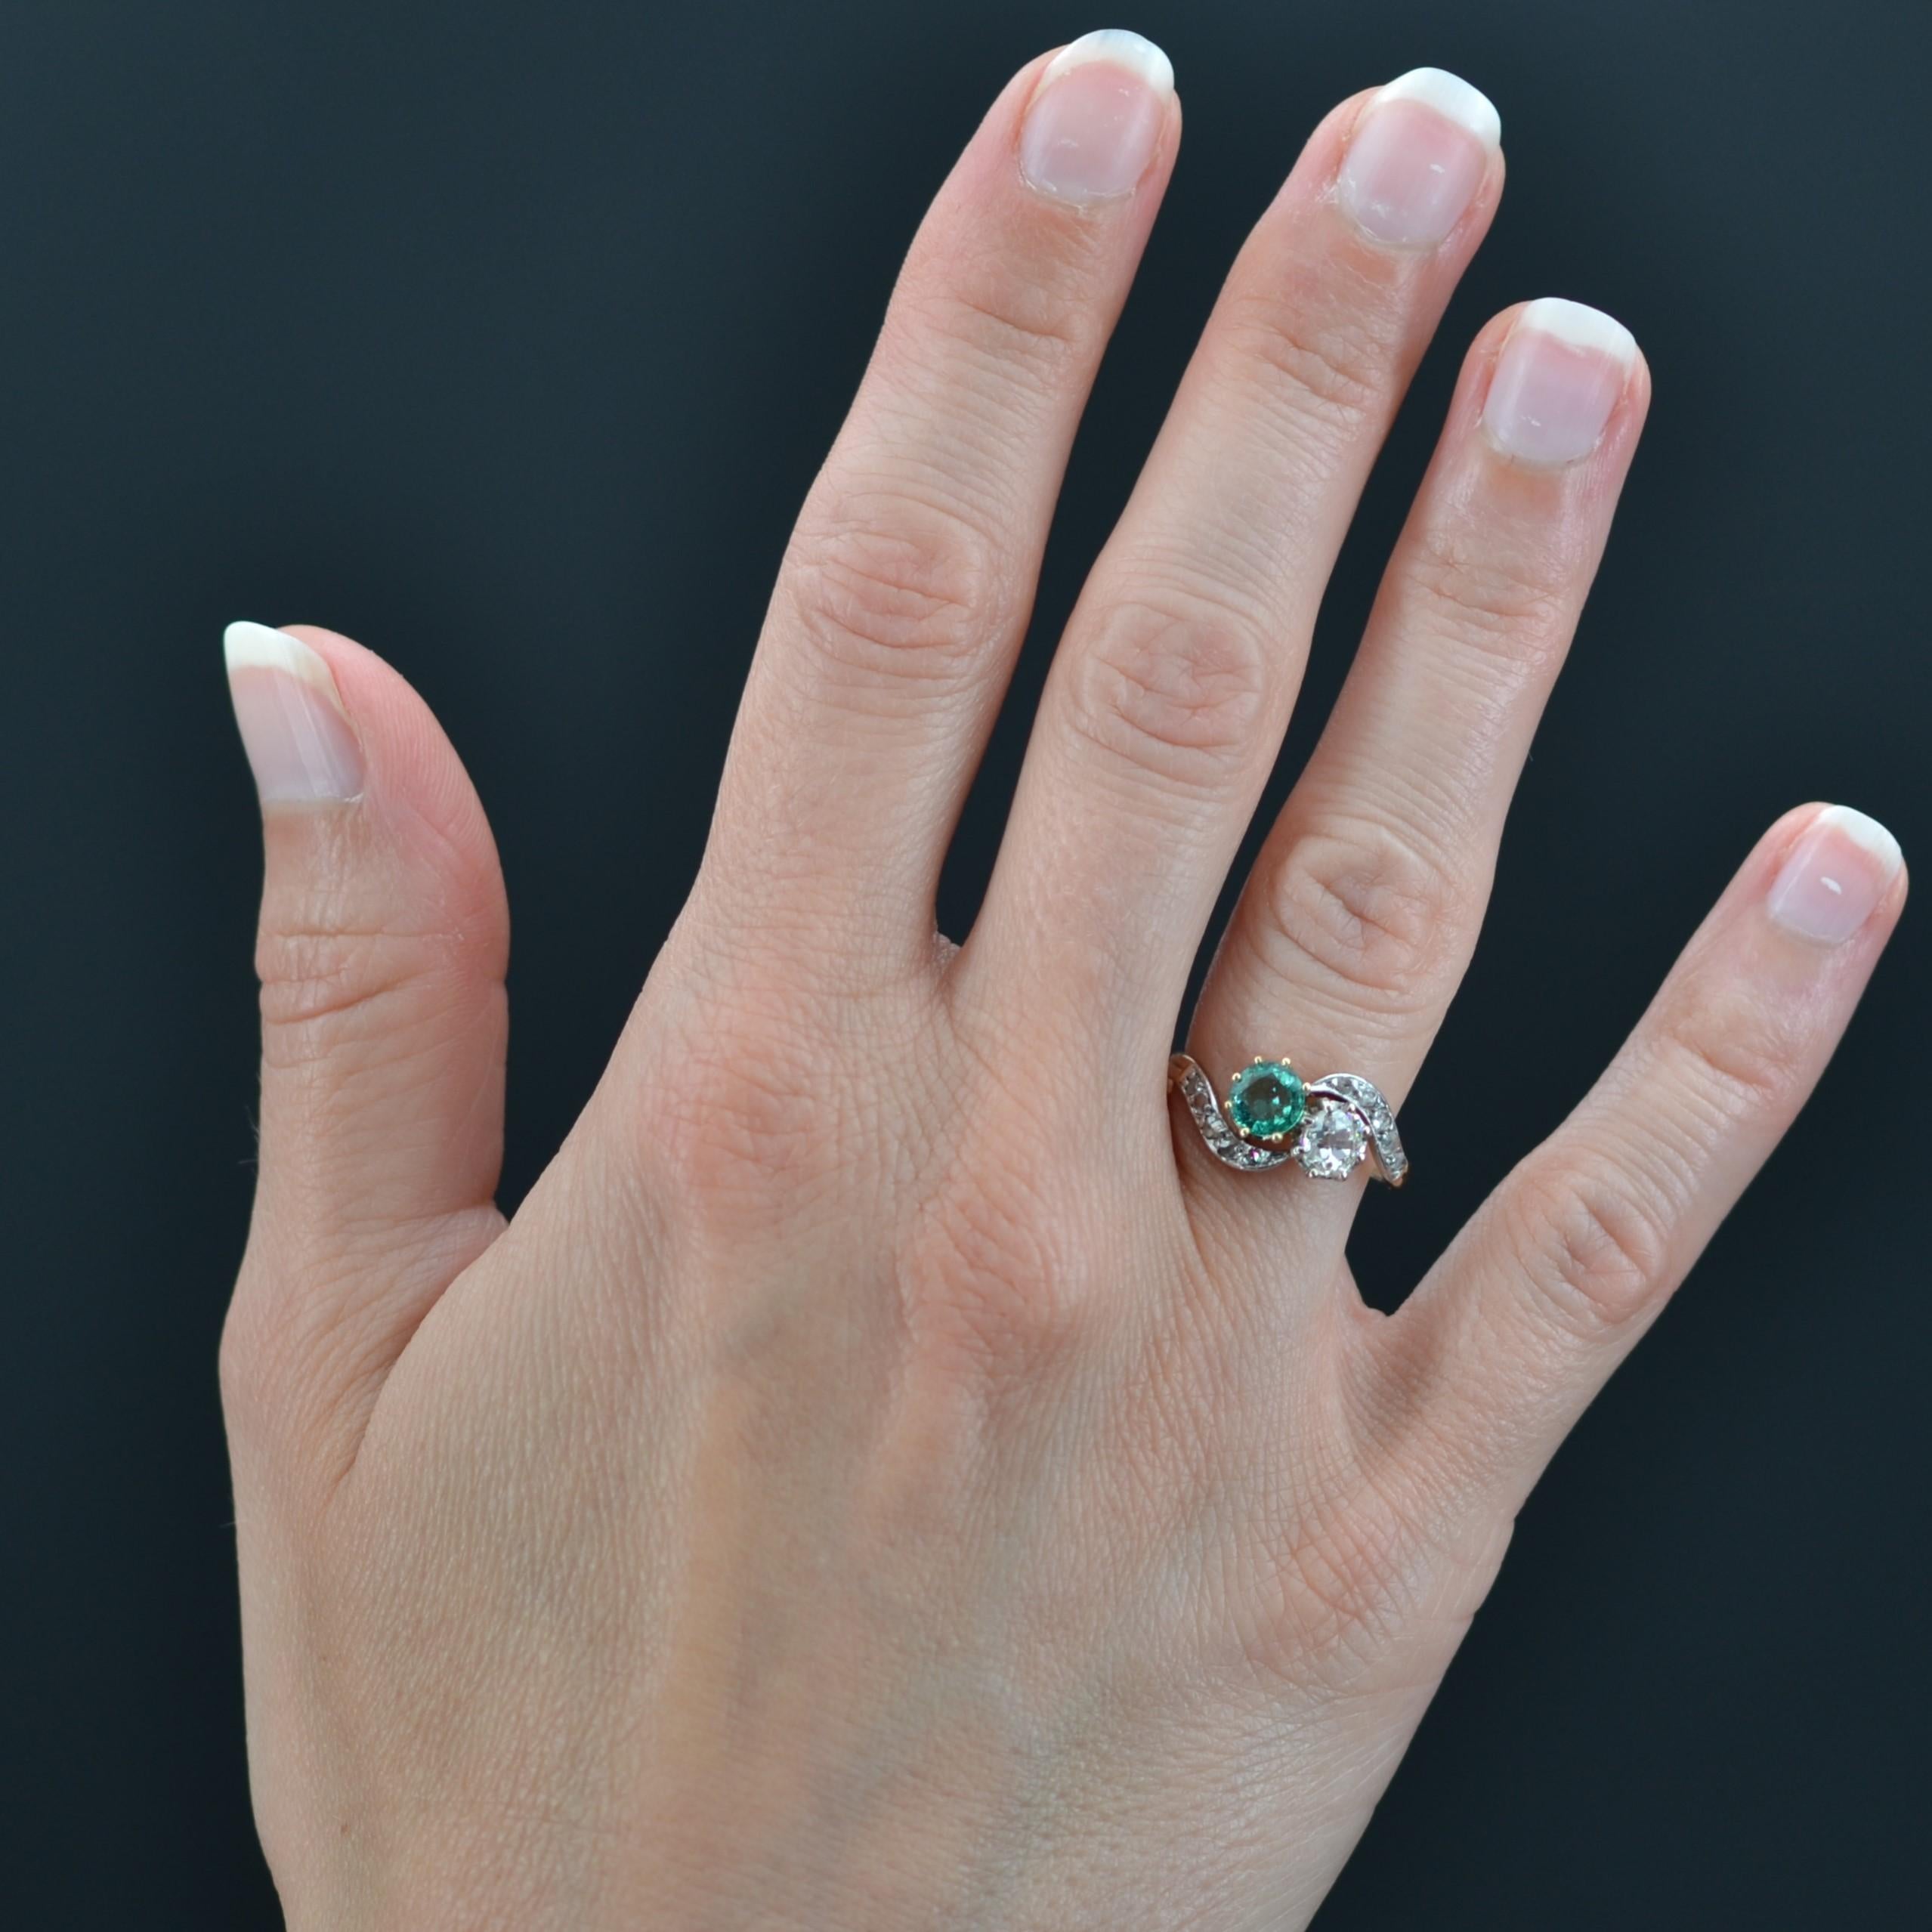 Ring in 18 karat yellow gold, and platinum.
Charming antique wedding ring, it is adorned on the top of a you and me formed by an antique cushion- cut diamond, and a round emerald water mint color. On either side, the start of the ring is formed by a